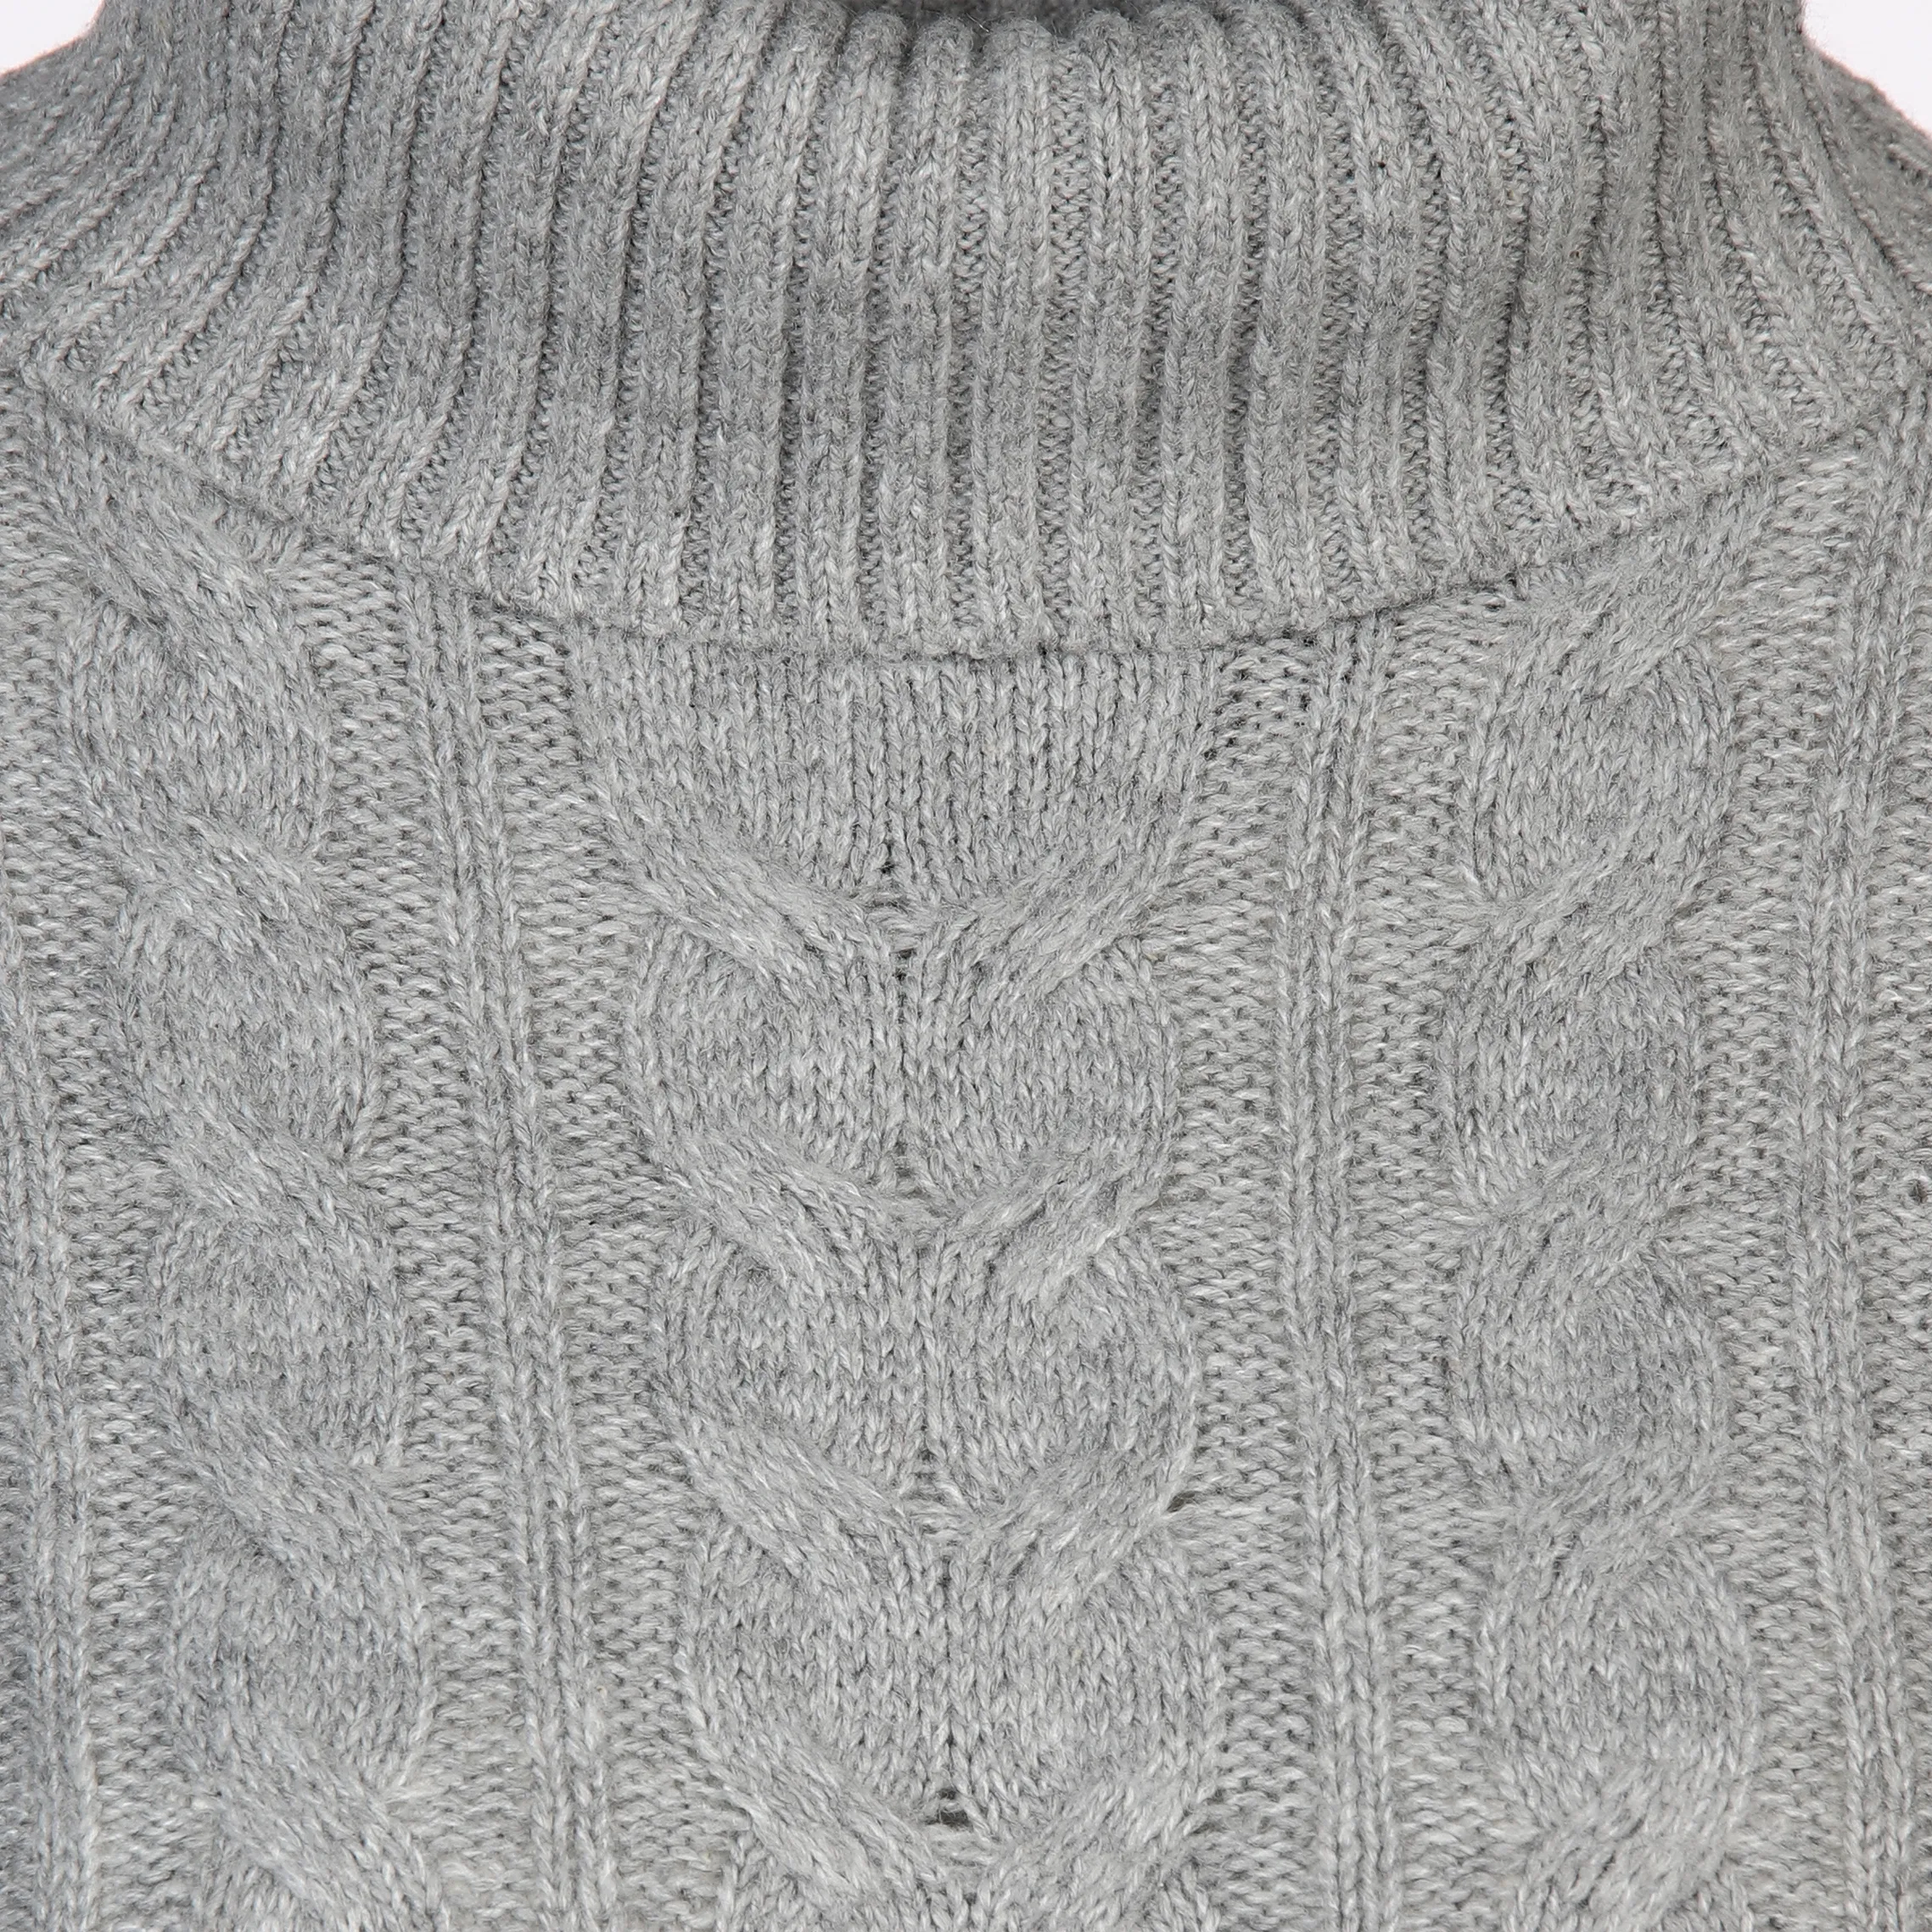 Tom Tailor 1041157 Knit pullover cable turtleneck Grau 887440 21373 3